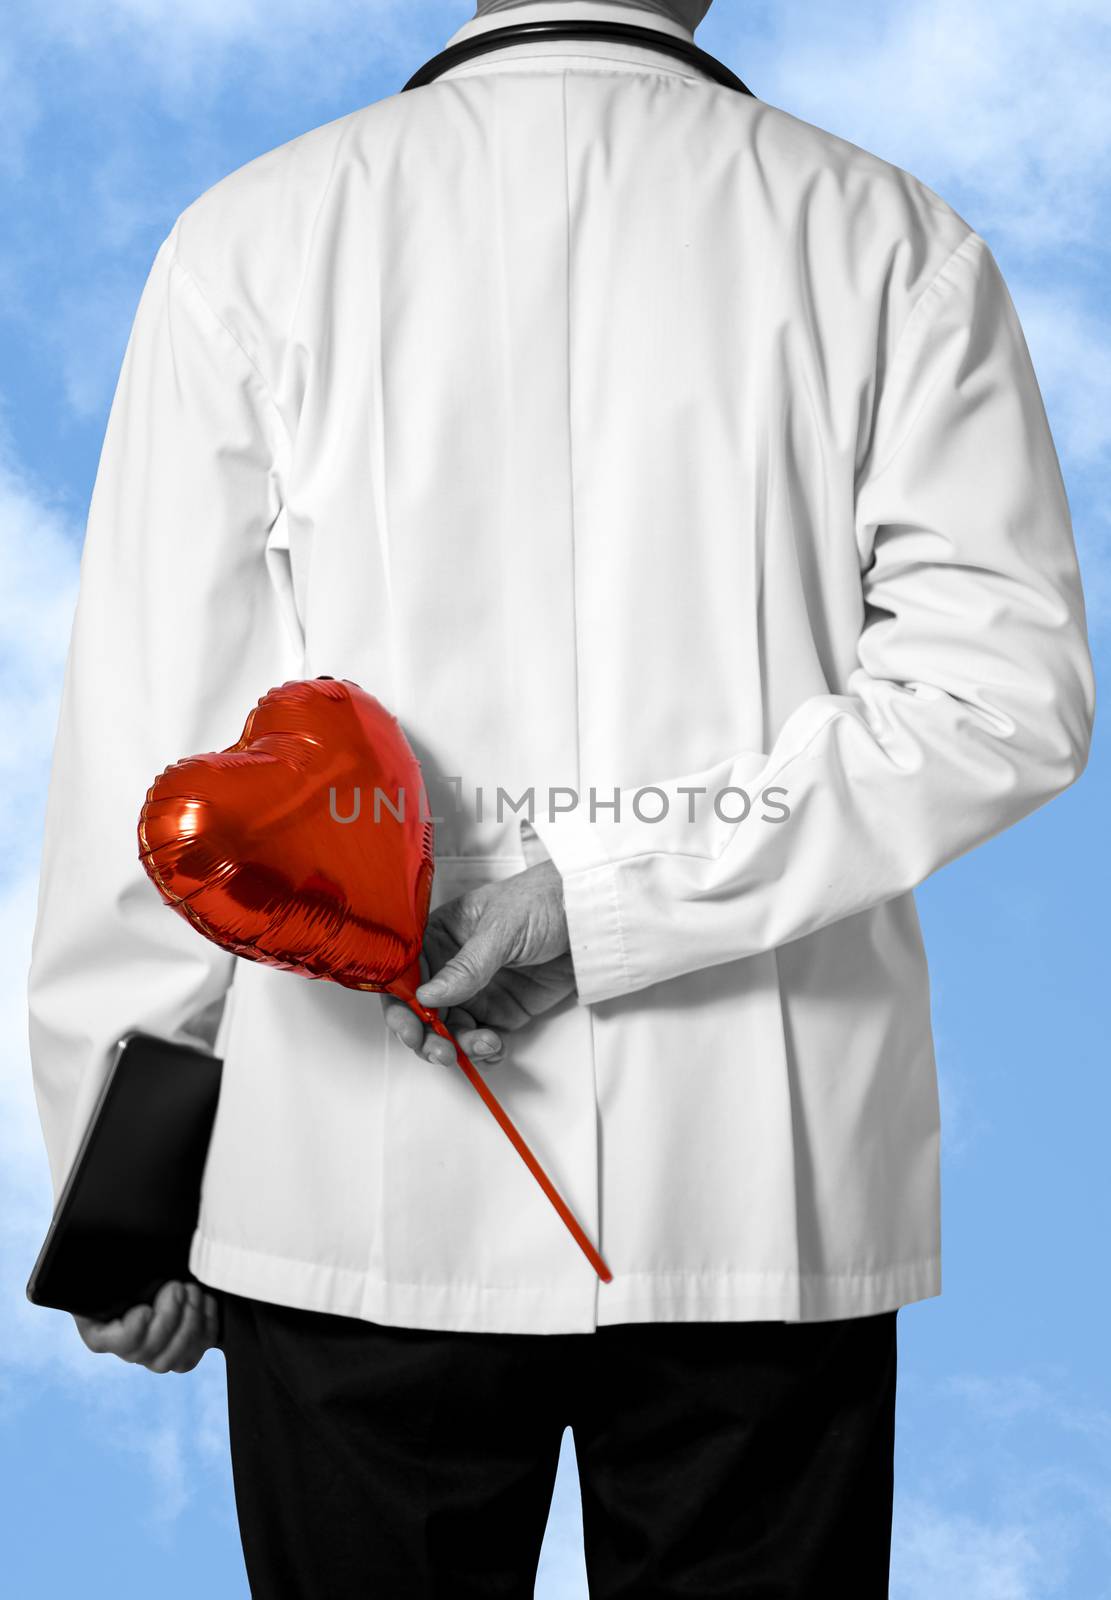 A doctor holding a red balloon behind his back by Nawoot